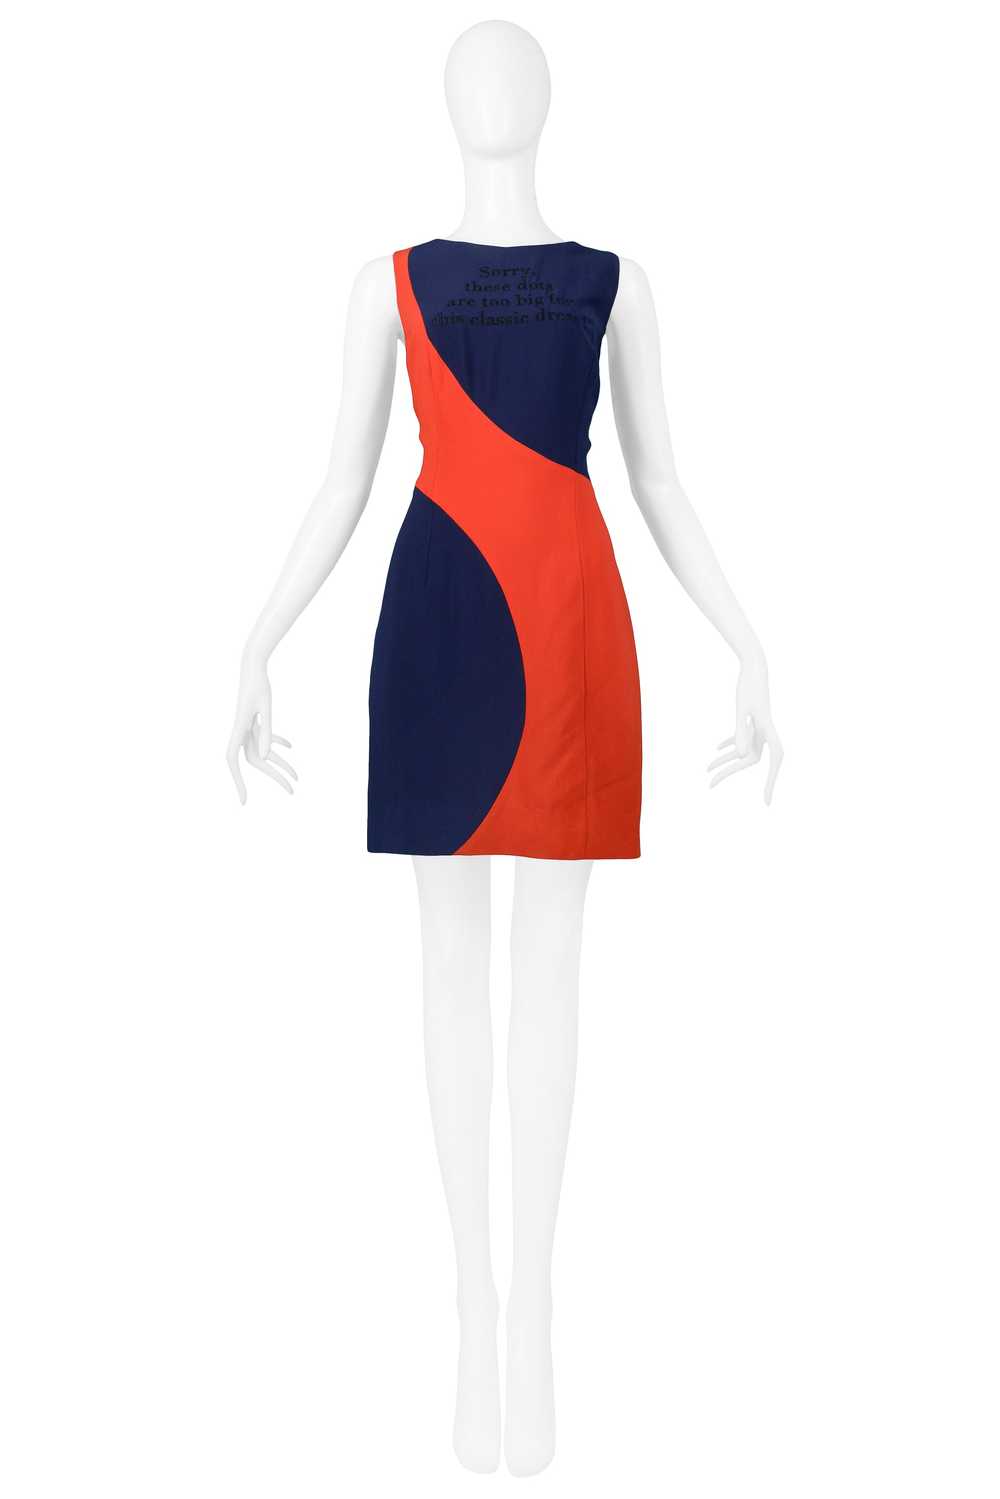 MOSCHINO COUTURE NAVY & RED BIG DOT DRESS - image 4